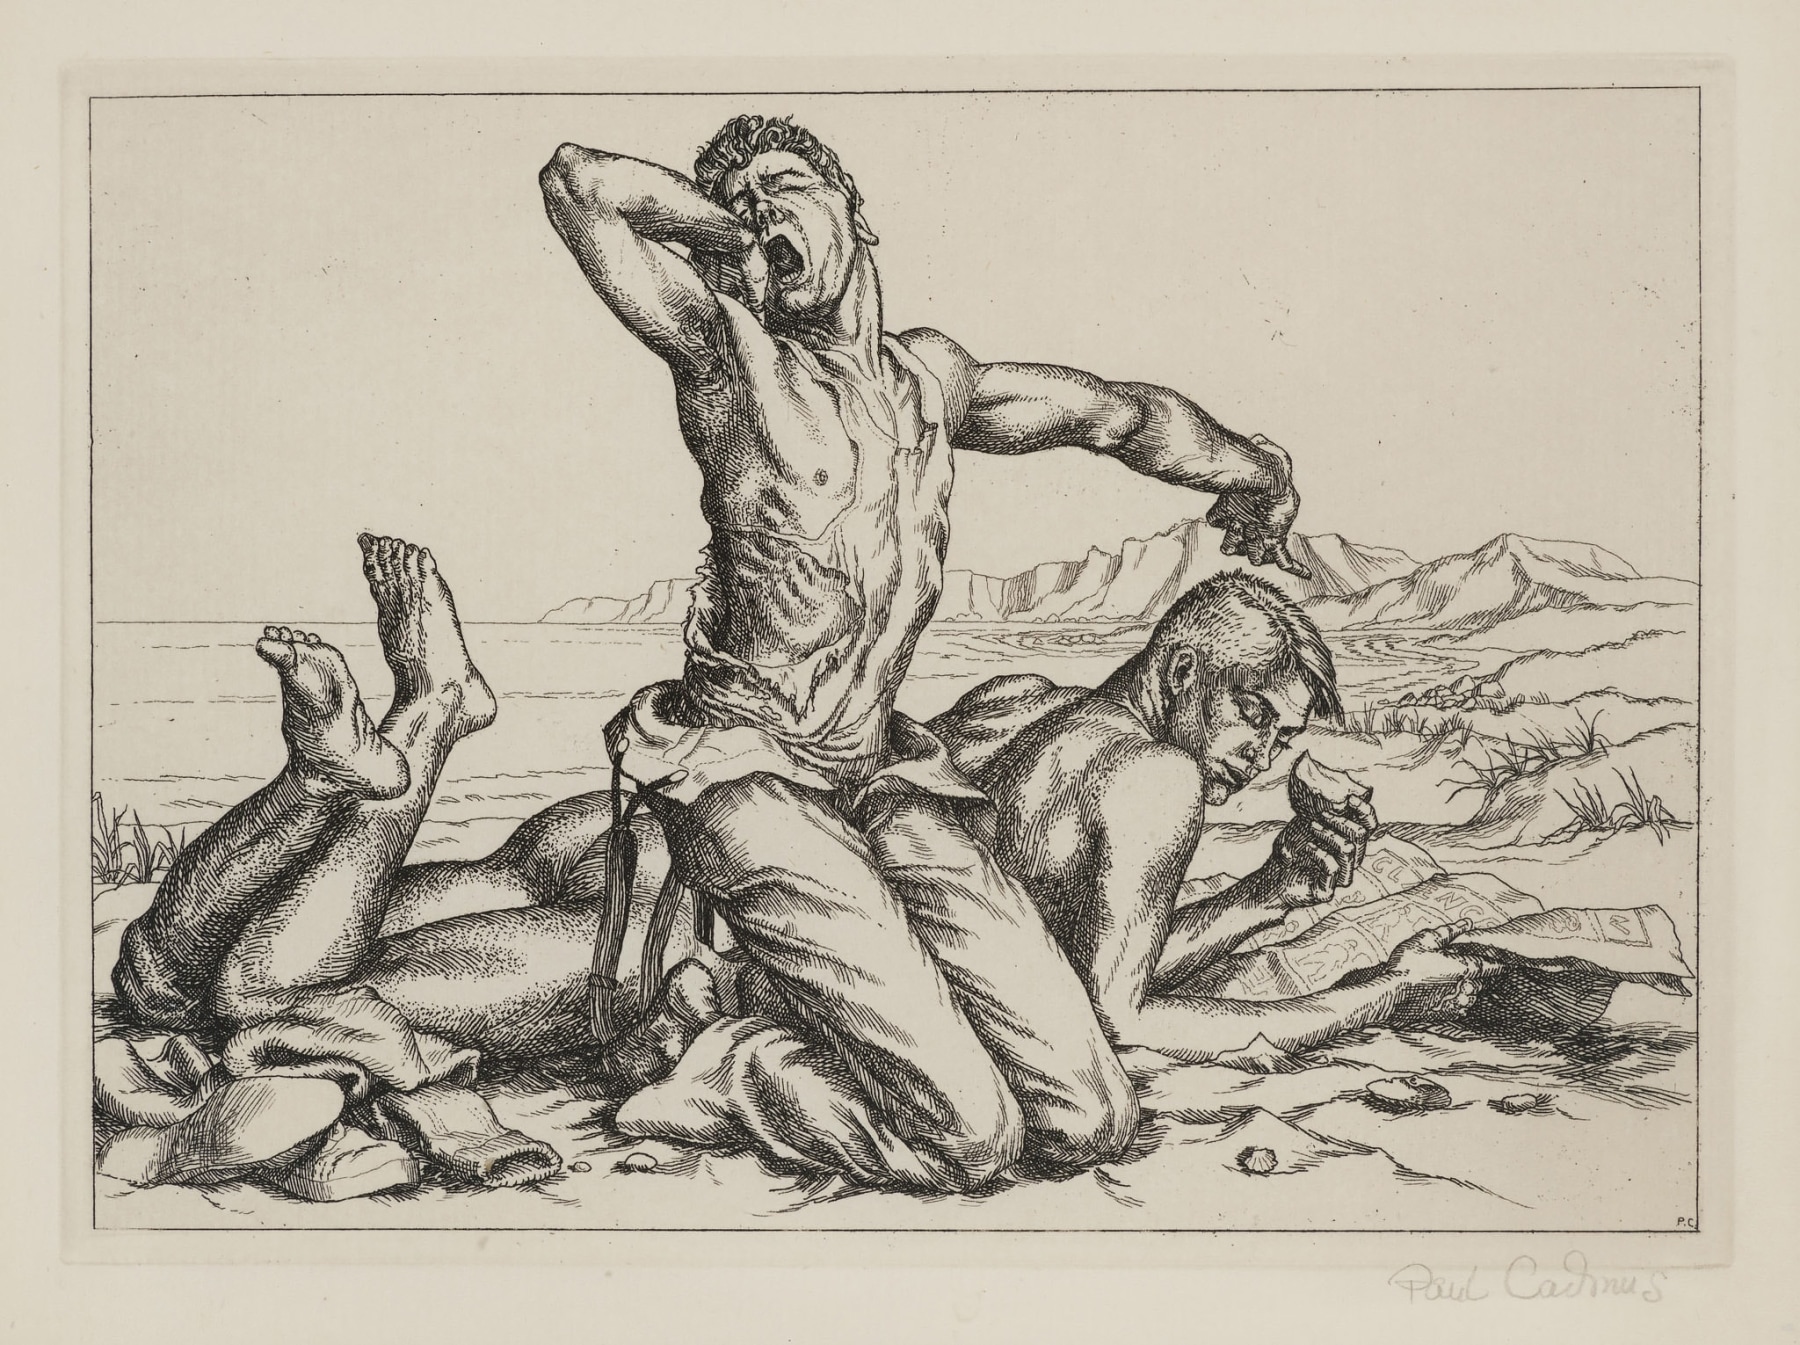 Two Boys on a Beach No. 1, 1938, Etching, 5 7/8 x 7 1/2 inches